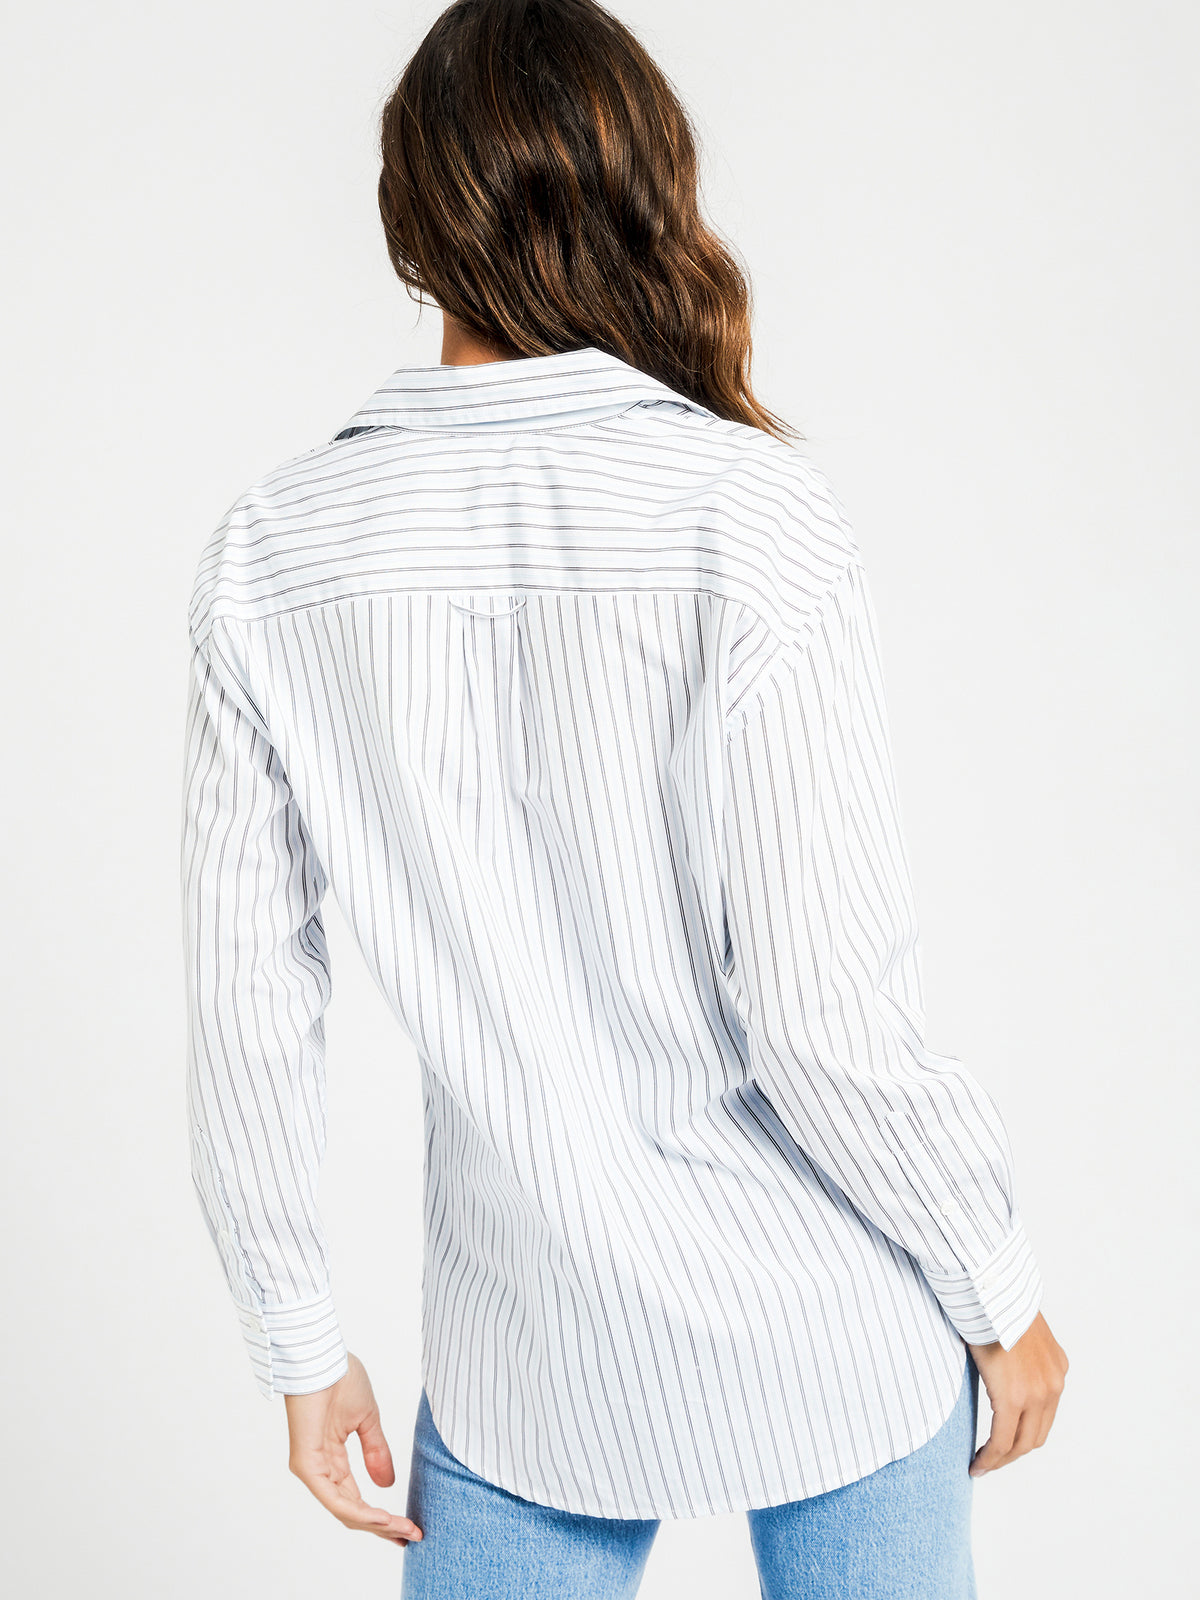 The Dad Shirt in Stripe Bright White